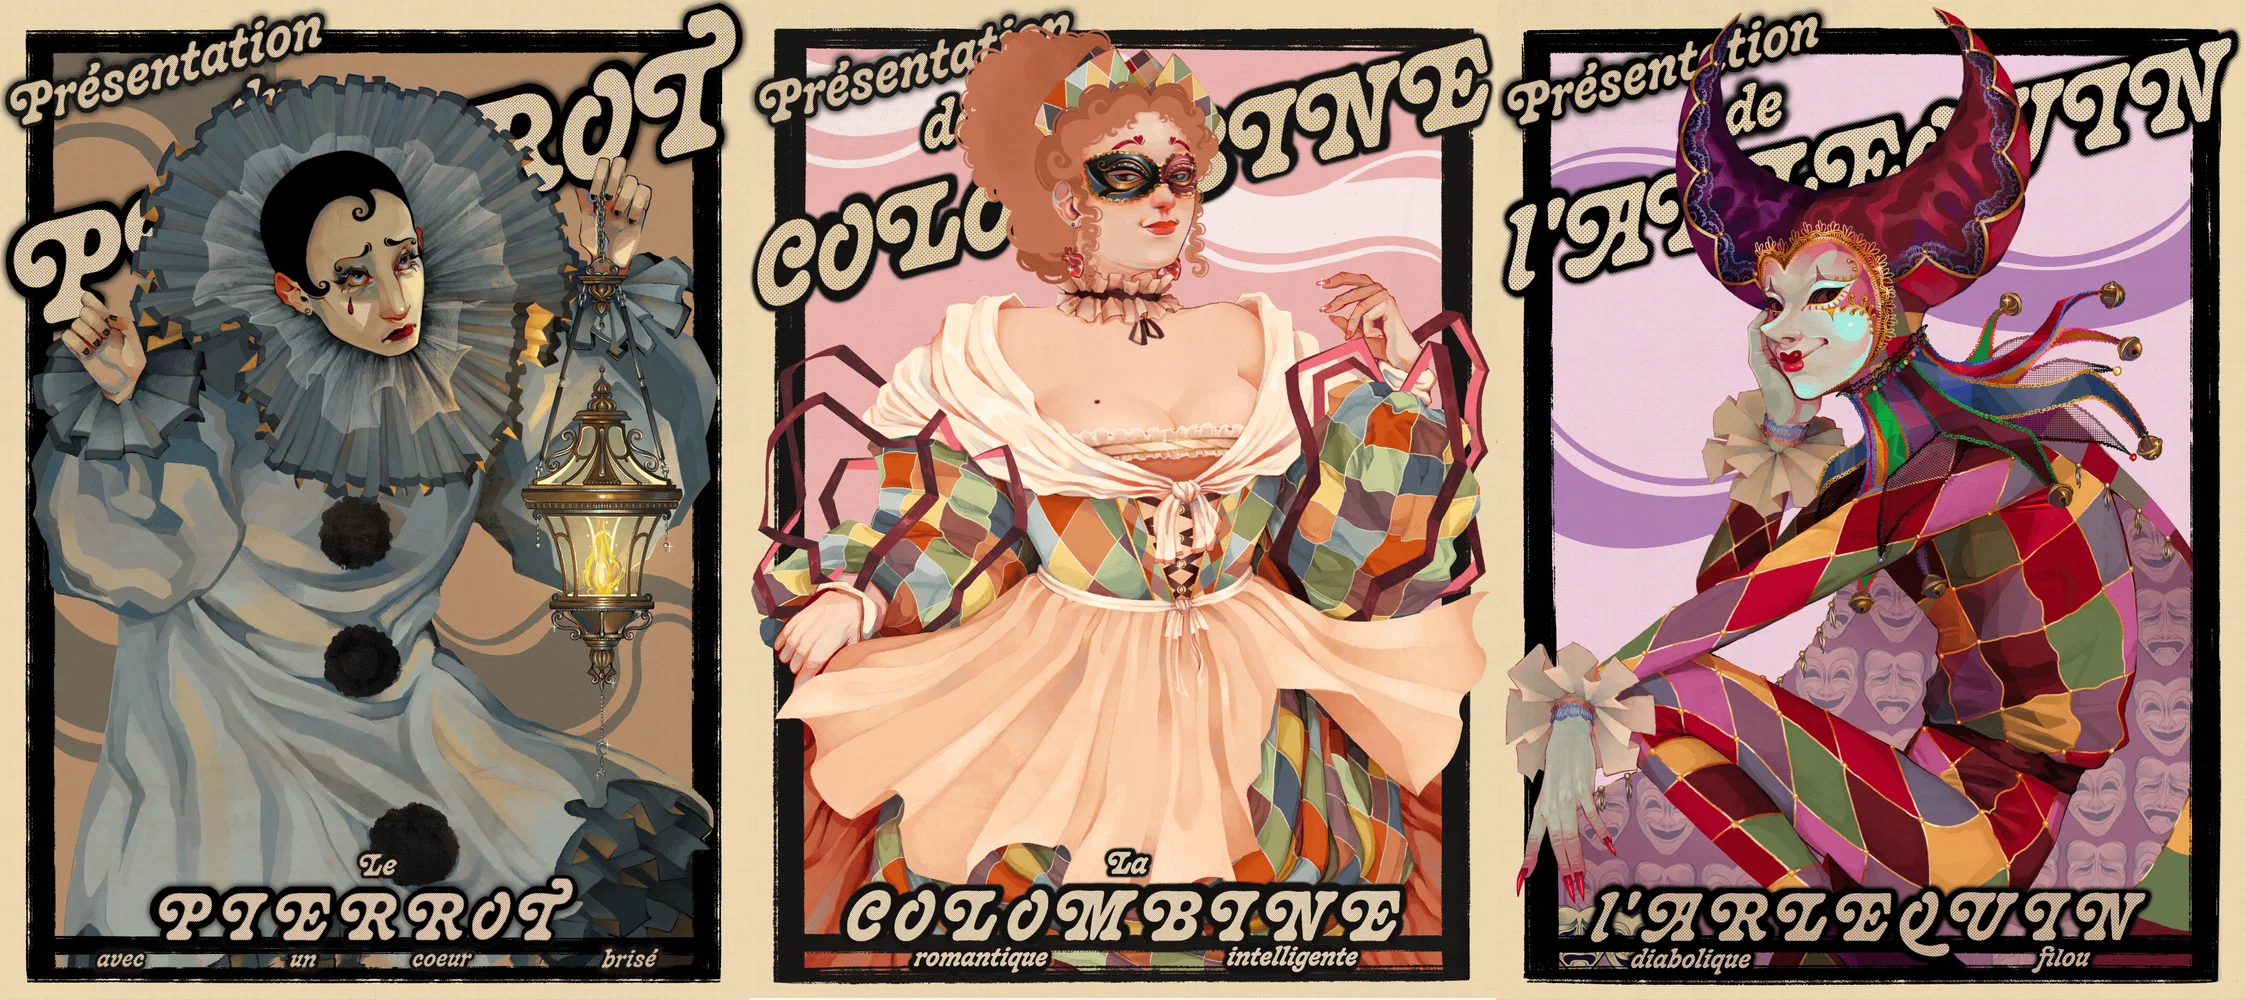 An illustration of three commedia dell'arte characters, a Pierrot, a Colombina, and a Harlequin. They are drawn in the style of a 1930s European theatrical poster, with text showing their names. 